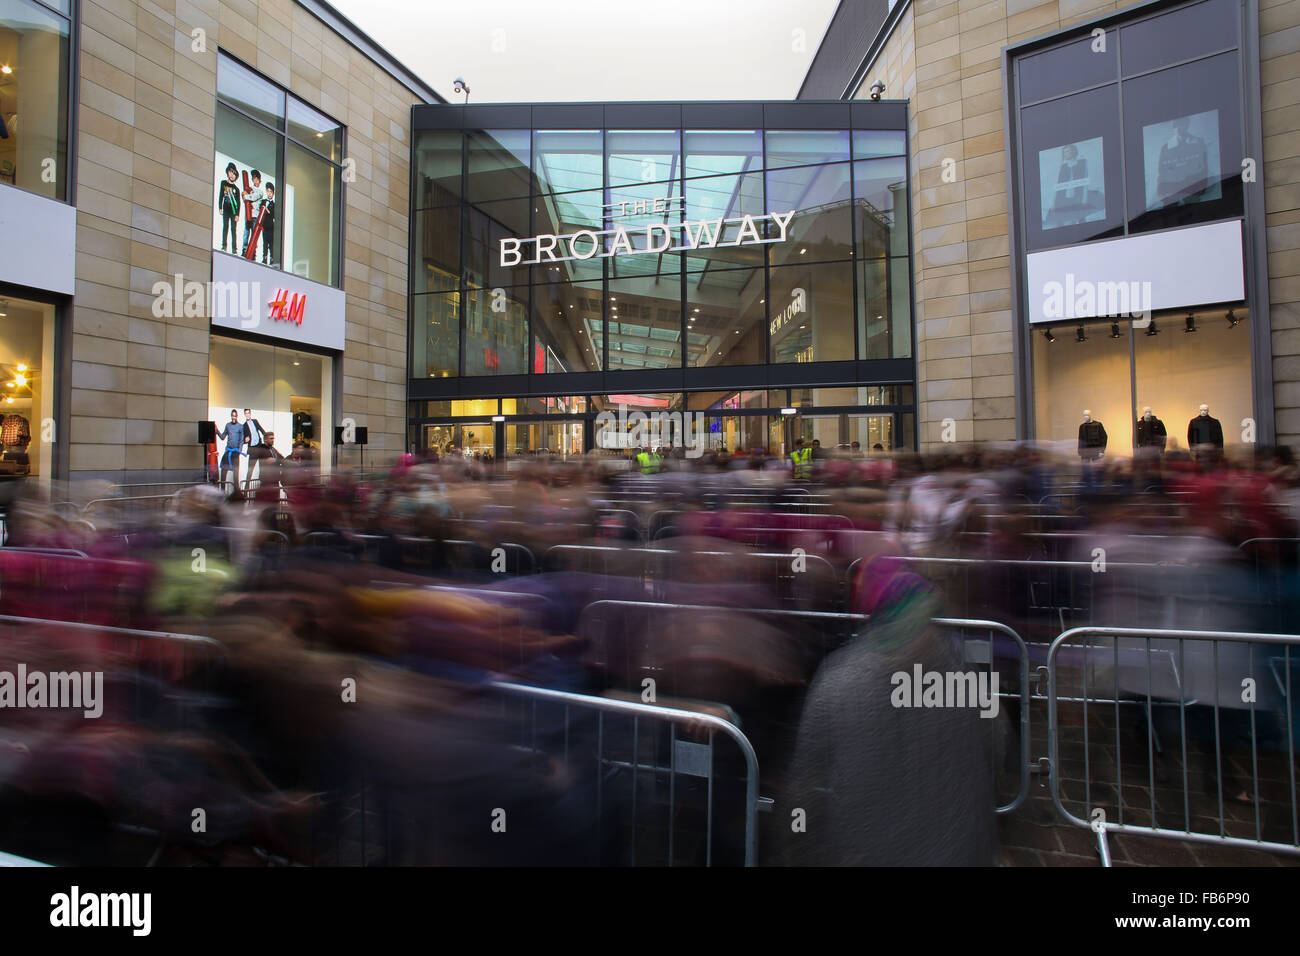 Crowds wait in the cold and rain to see inside the new Broadway shopping centre in Bradford, West Yorkshire, UK. Stock Photo